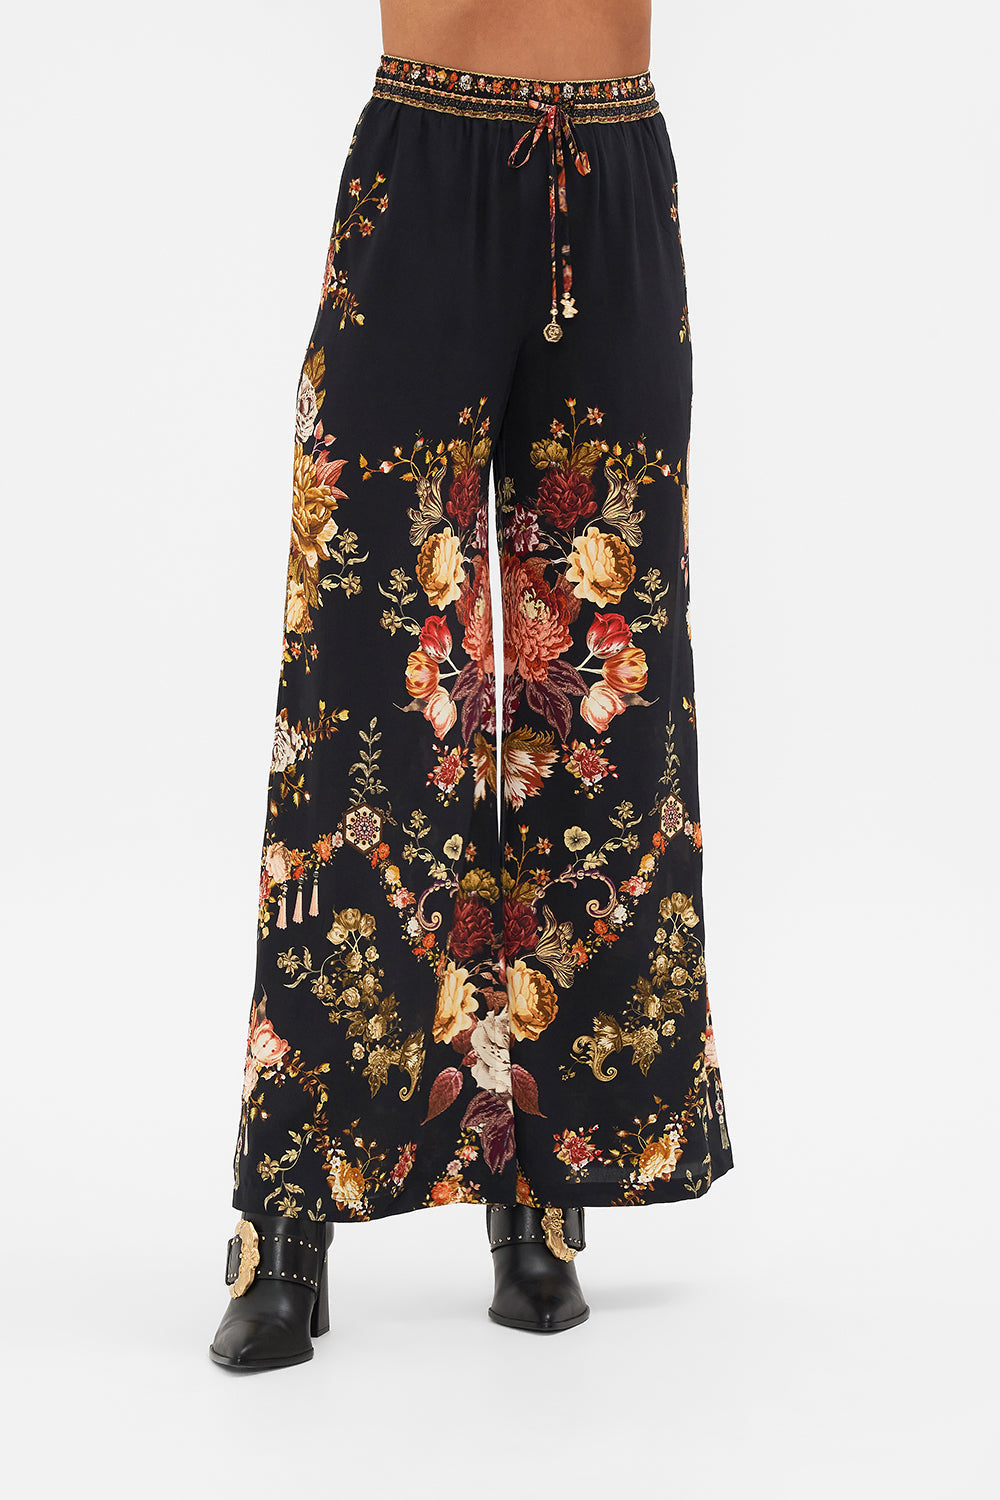 CAMILLA Floral Lounge Pant in Stitched in Time